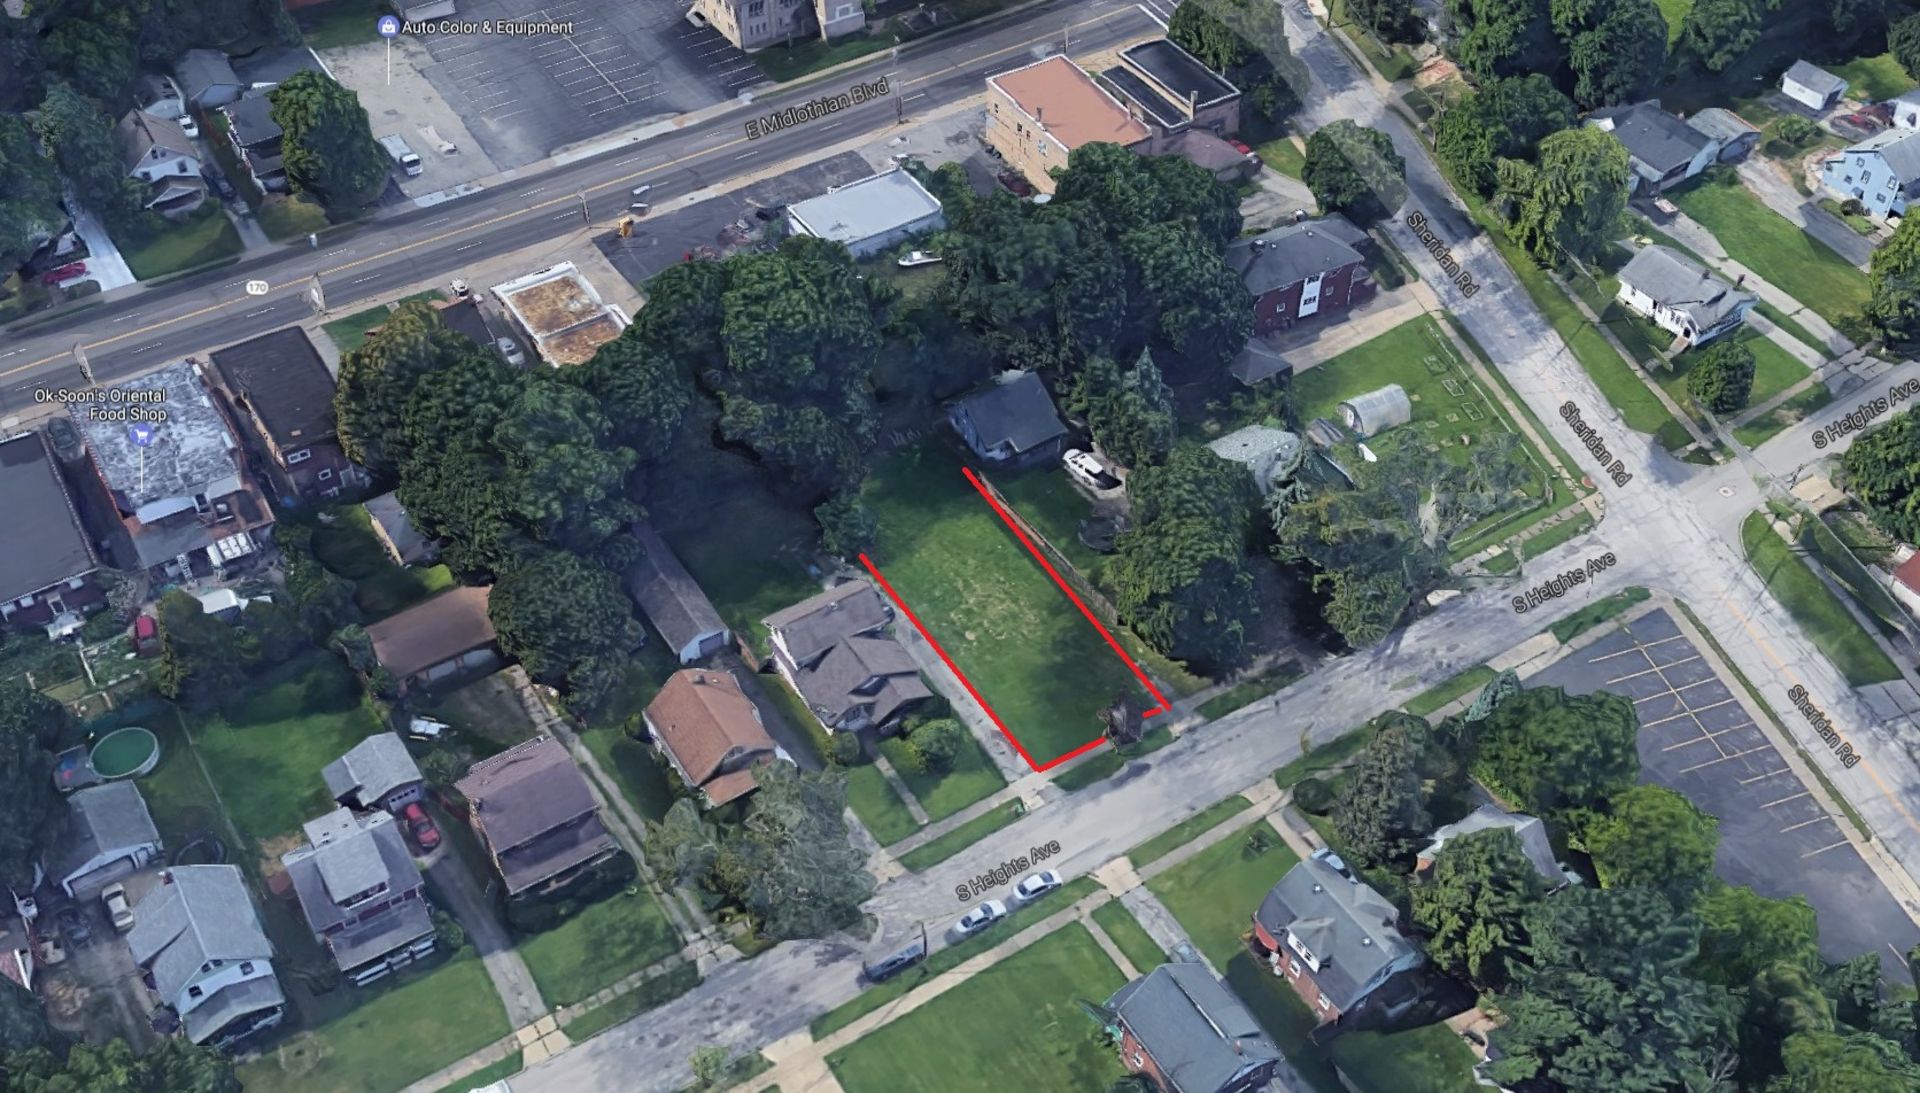 PLOT OF LAND AT 1921 S HEIGHTS AVENUE, YOUNGSTOWN, OHIO